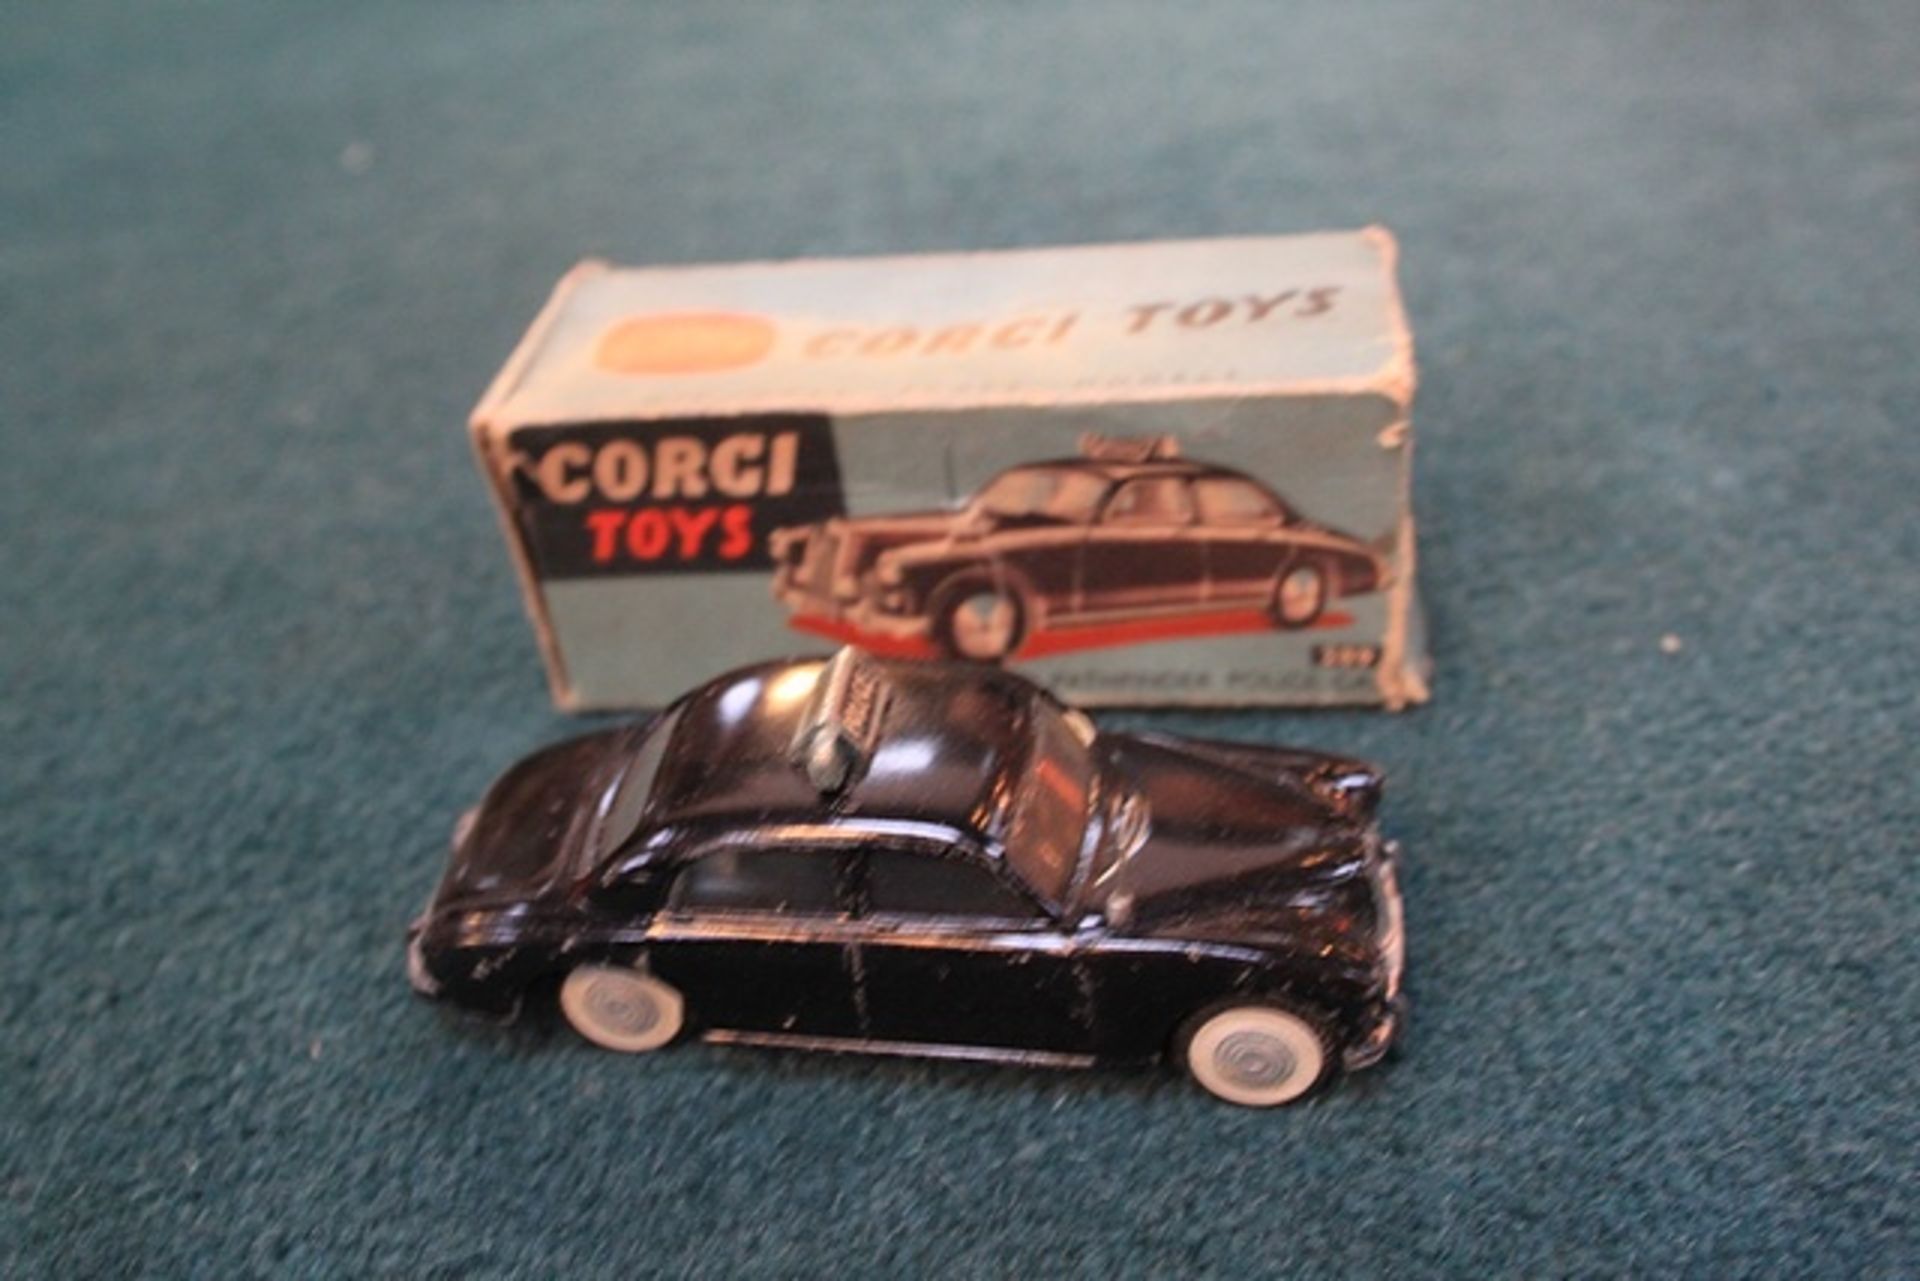 Corgi Toys Diecast model 209 Riley Pathfinder police car complete with box (damage to box)